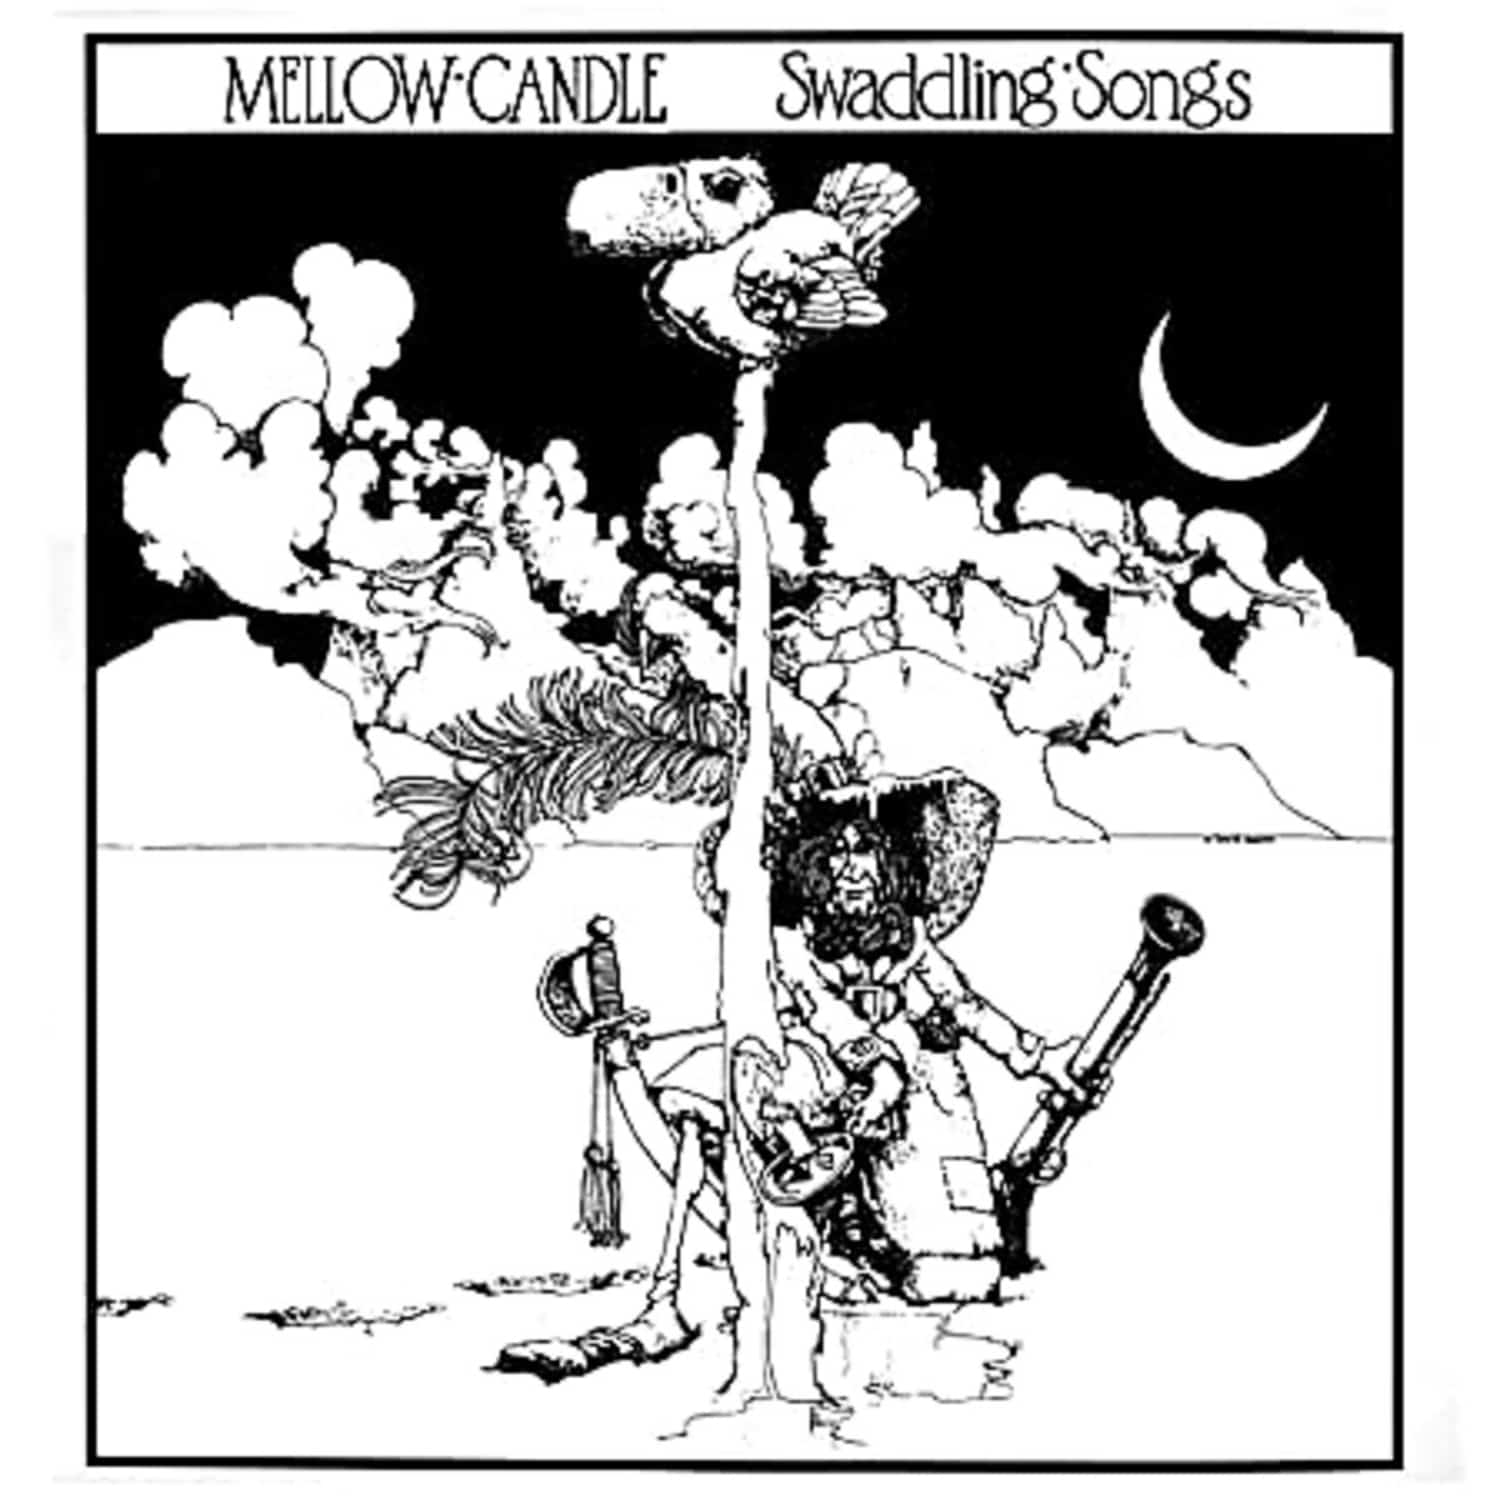 Mellow Candle - SWADDLING SONGS 